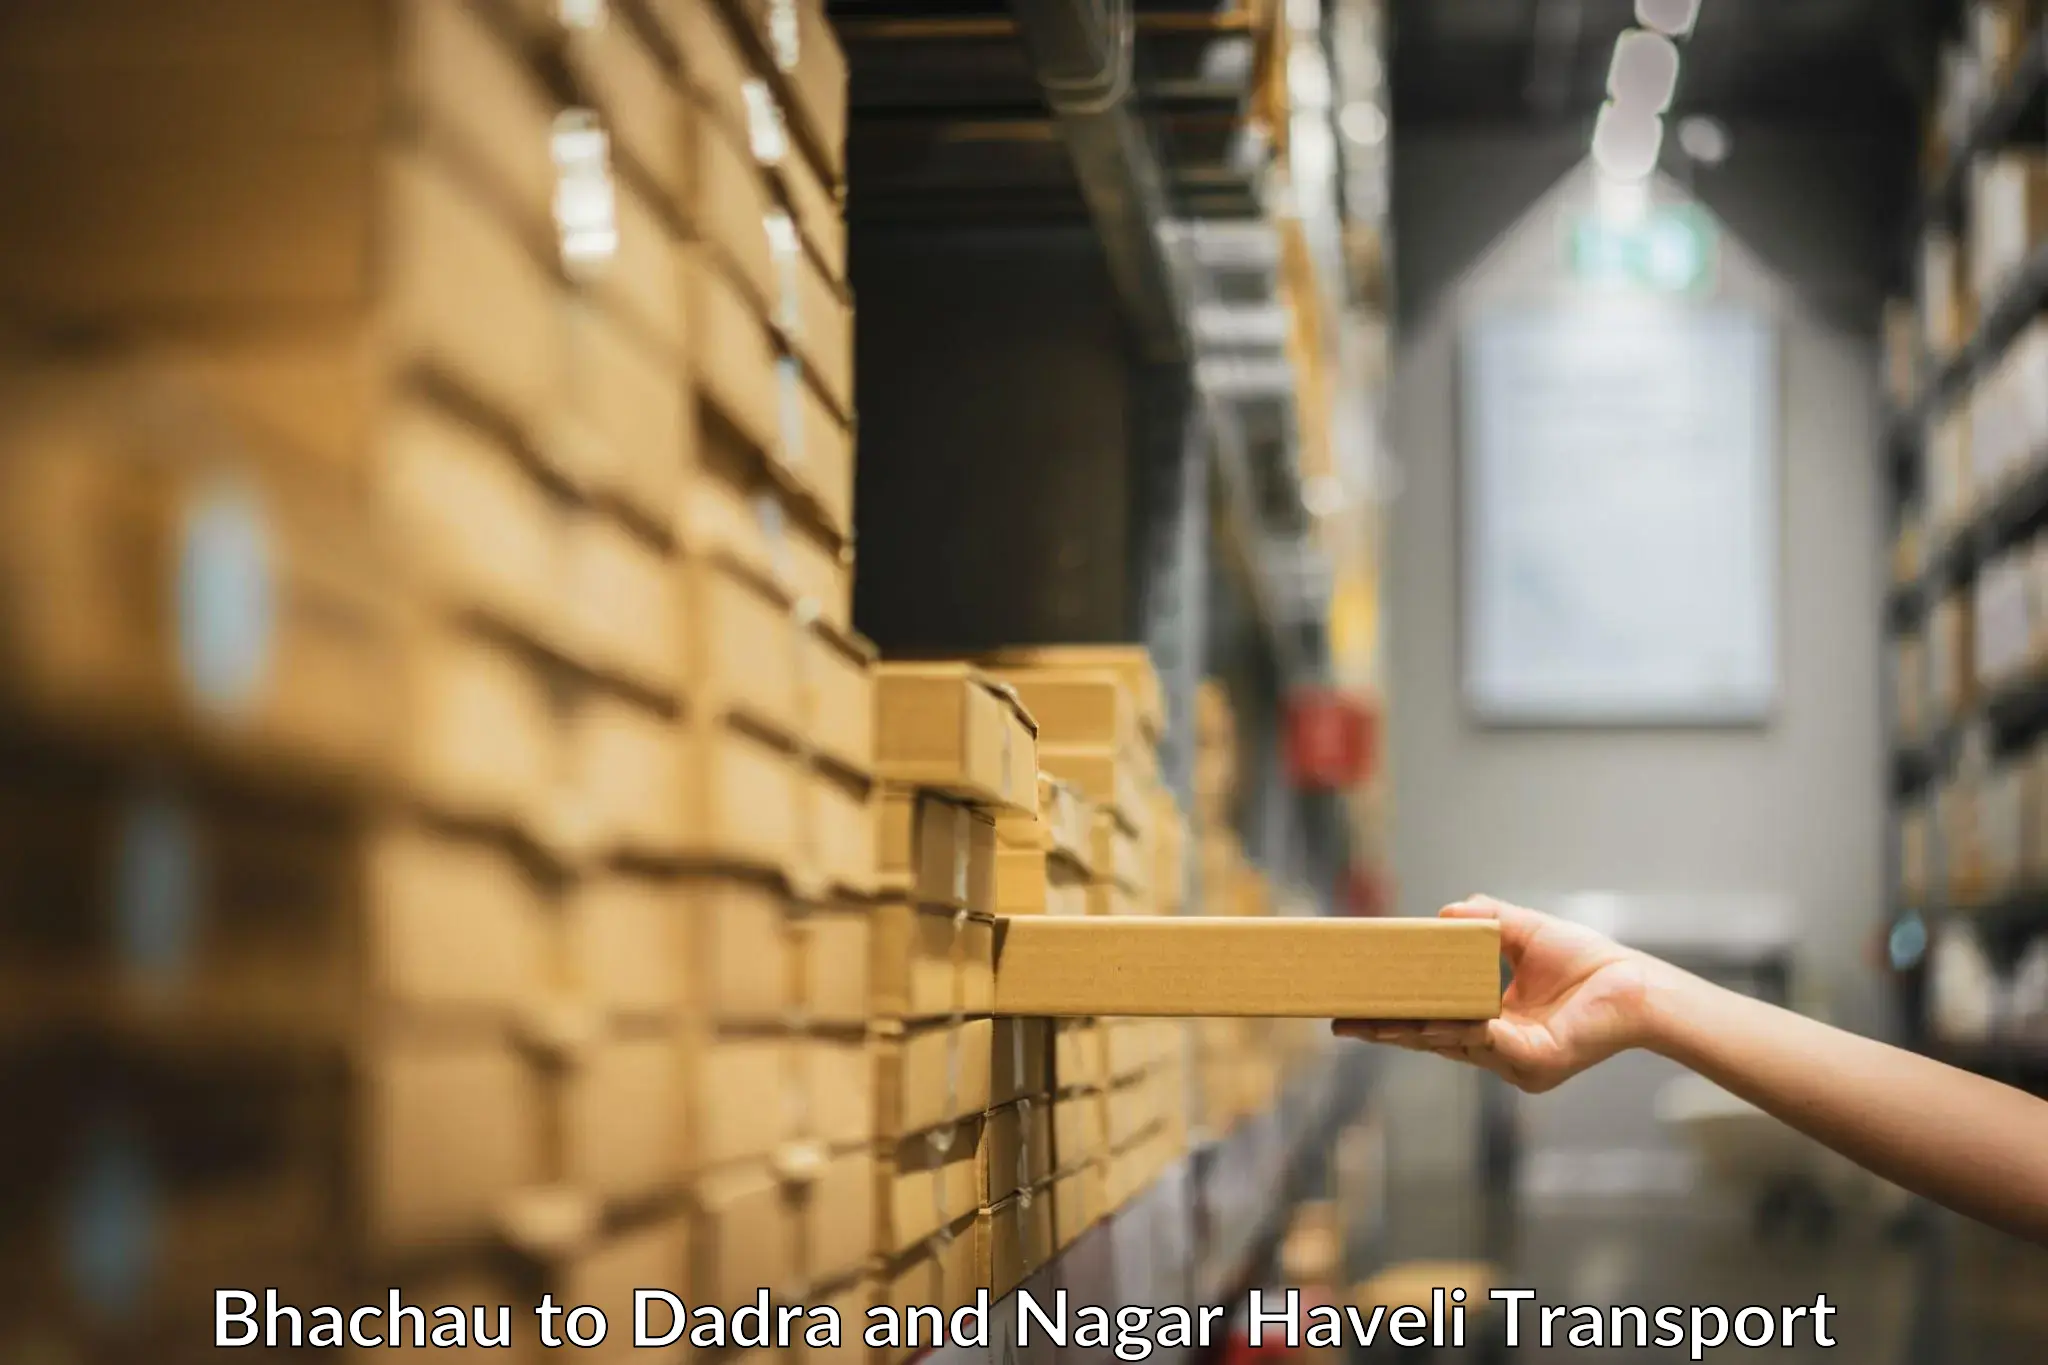 Container transportation services in Bhachau to Dadra and Nagar Haveli